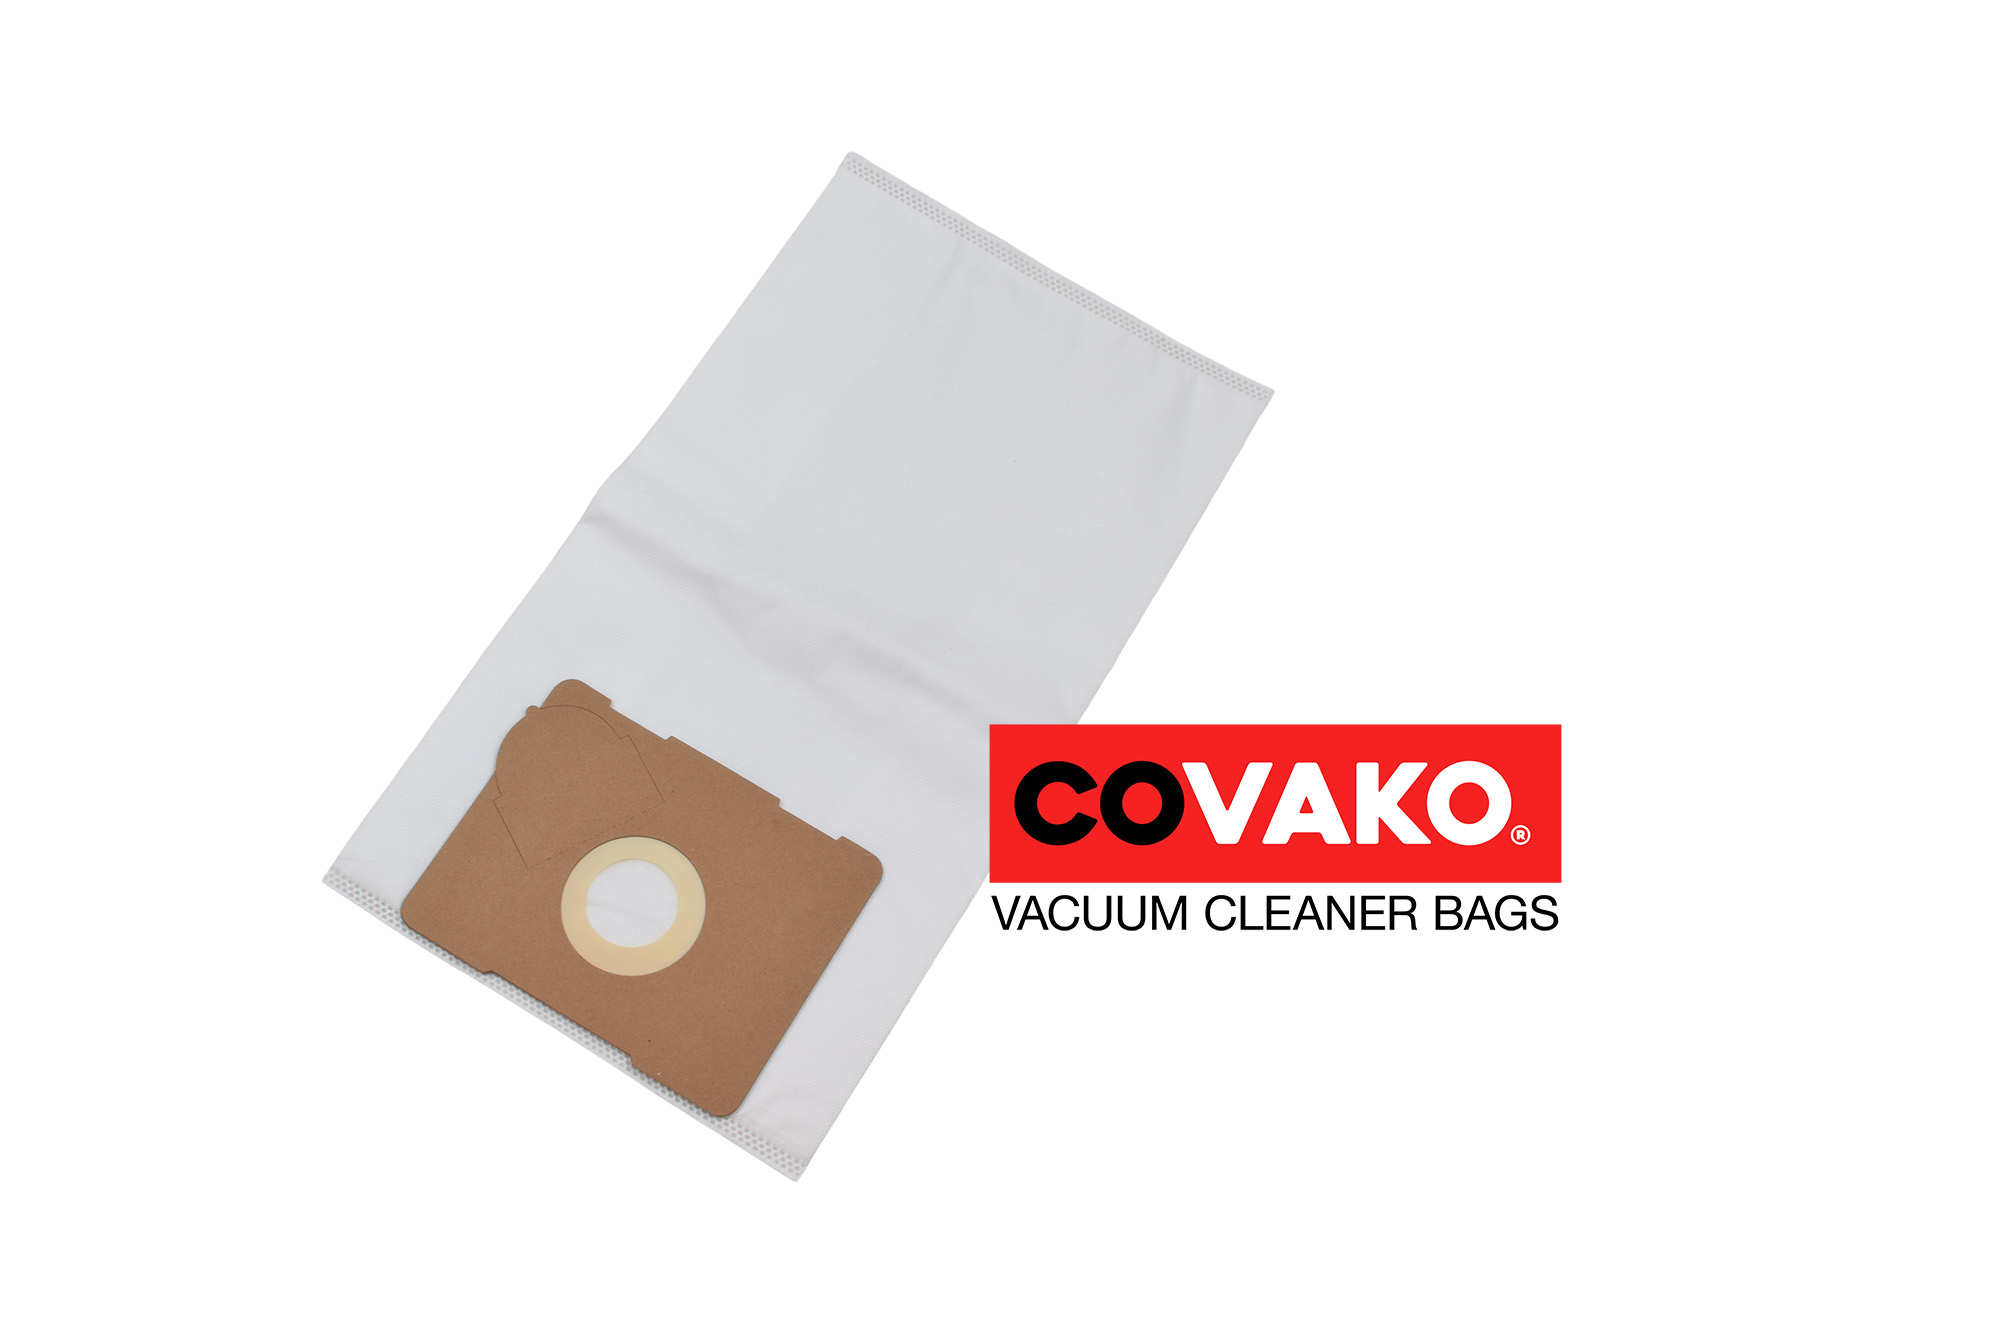 Protool VCP 170 E / Synthesis - Protool vacuum cleaner bags